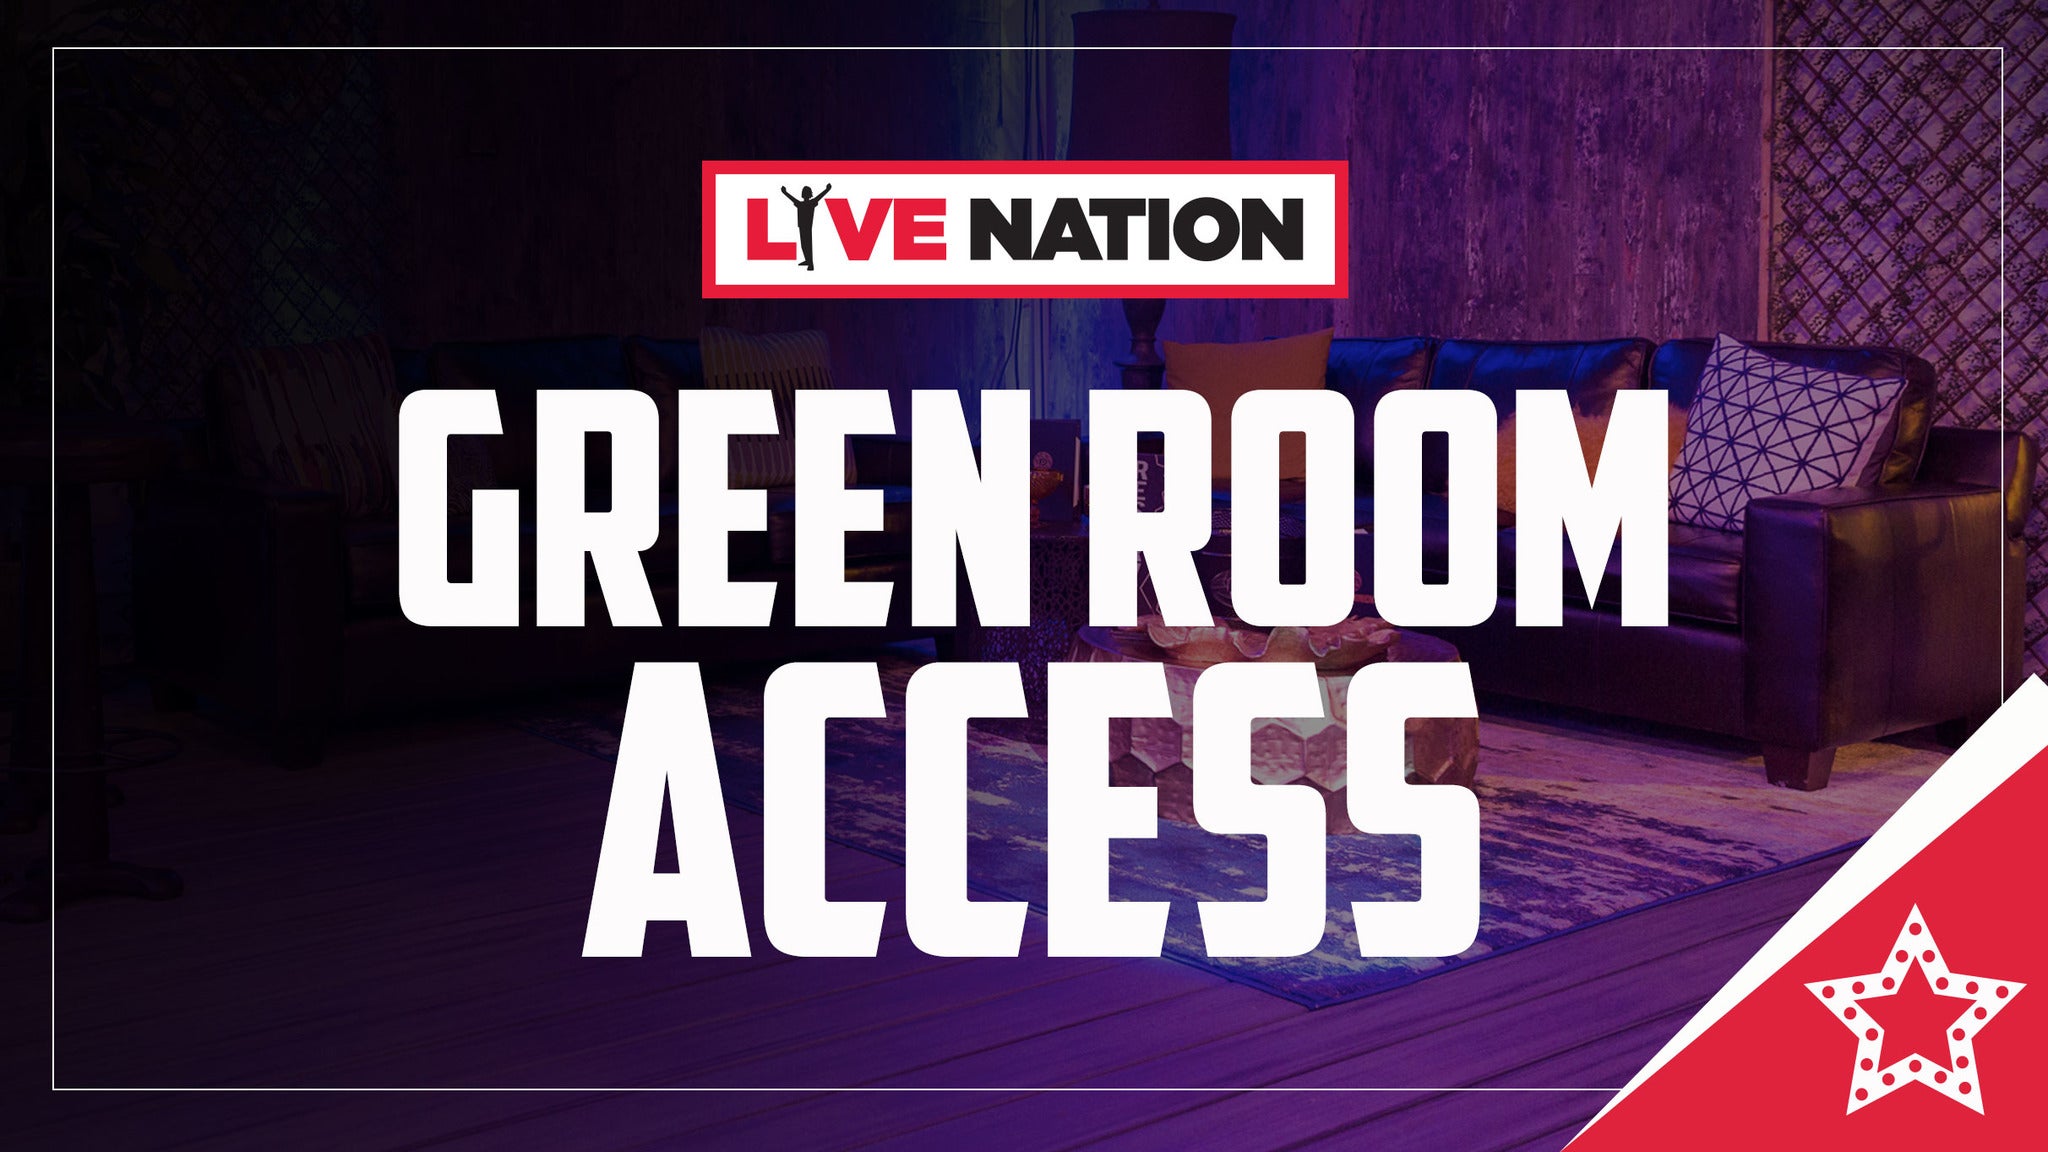 Live Nation Green Room Access Tickets | Event Dates & Schedule | 0